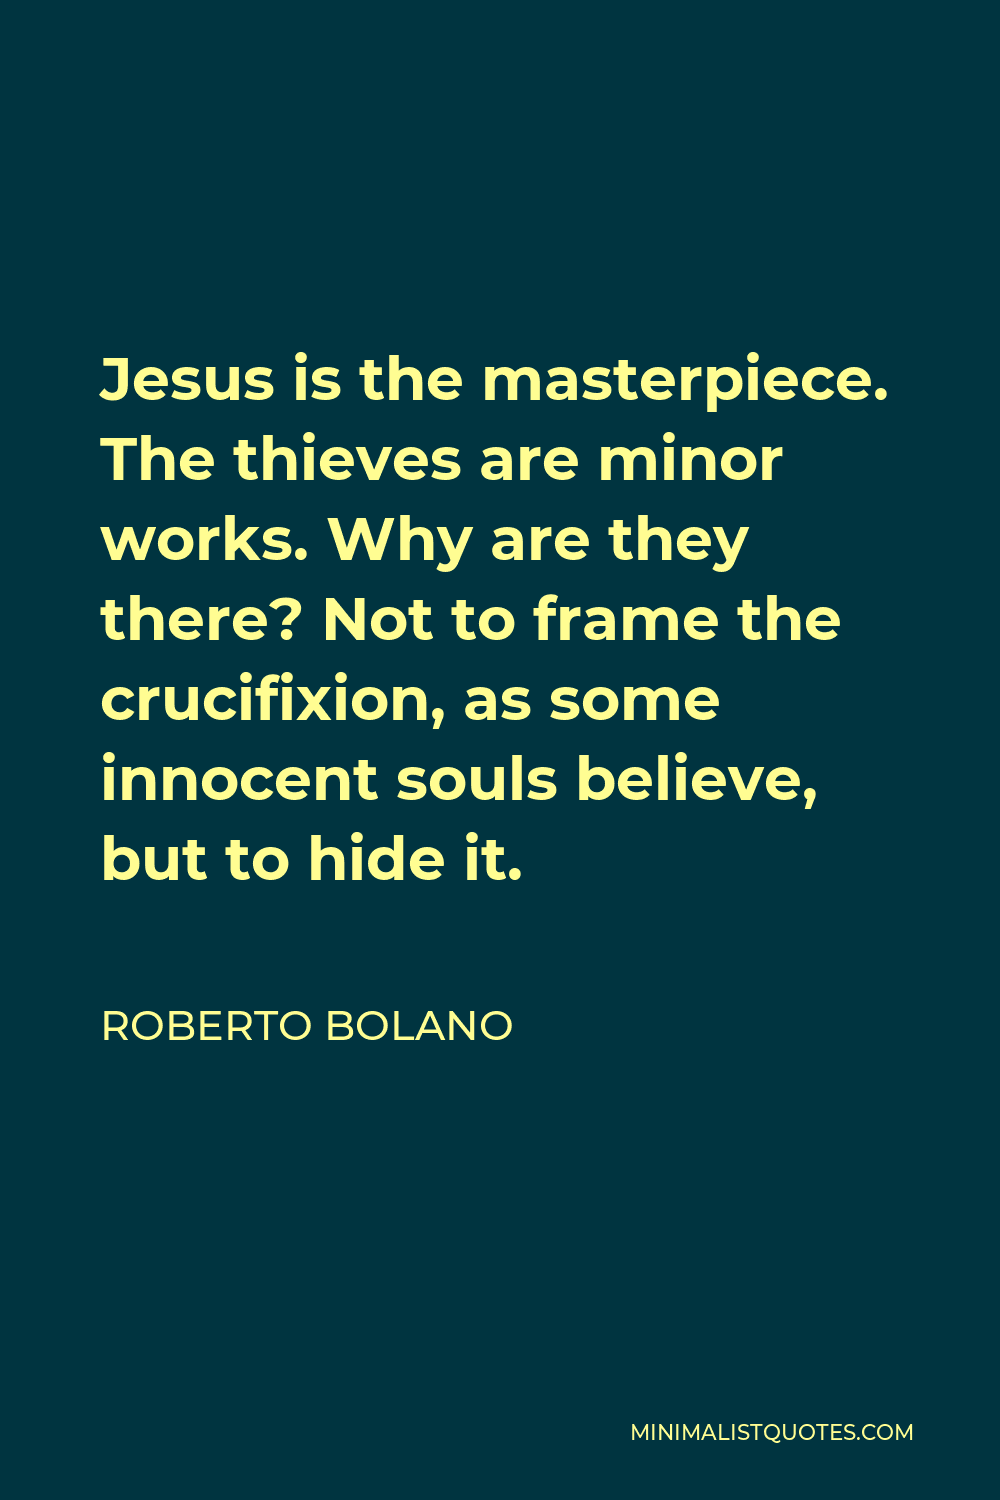 Roberto Bolano Quote - Jesus is the masterpiece. The thieves are minor works. Why are they there? Not to frame the crucifixion, as some innocent souls believe, but to hide it.